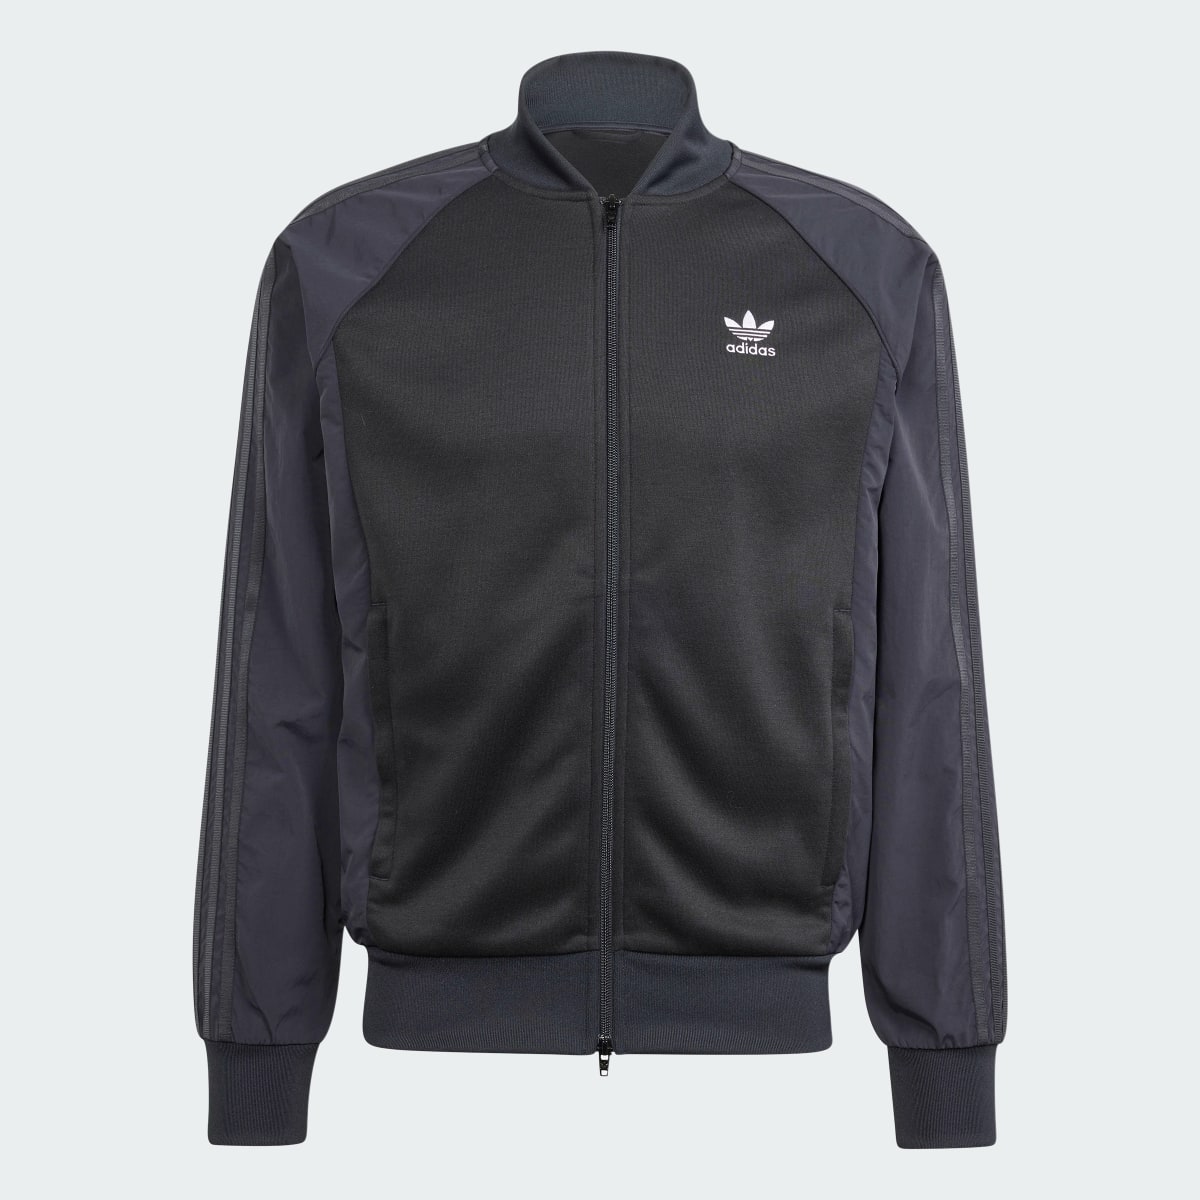 Adidas Adicolor Re-Pro SST Material Mix Track Top. 5